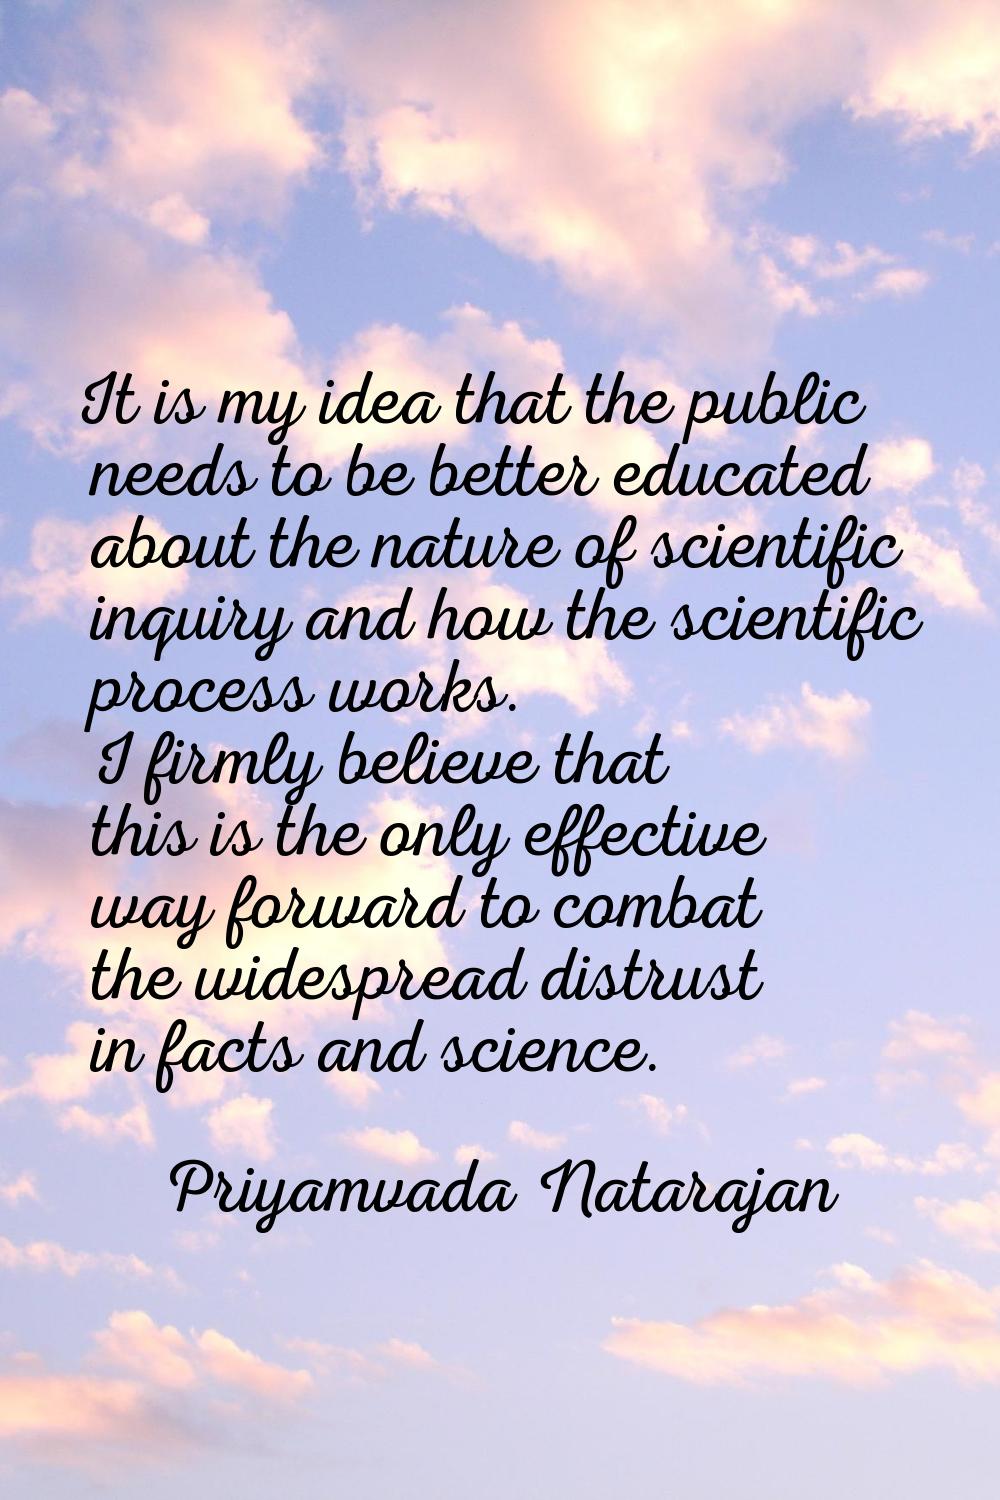 It is my idea that the public needs to be better educated about the nature of scientific inquiry an